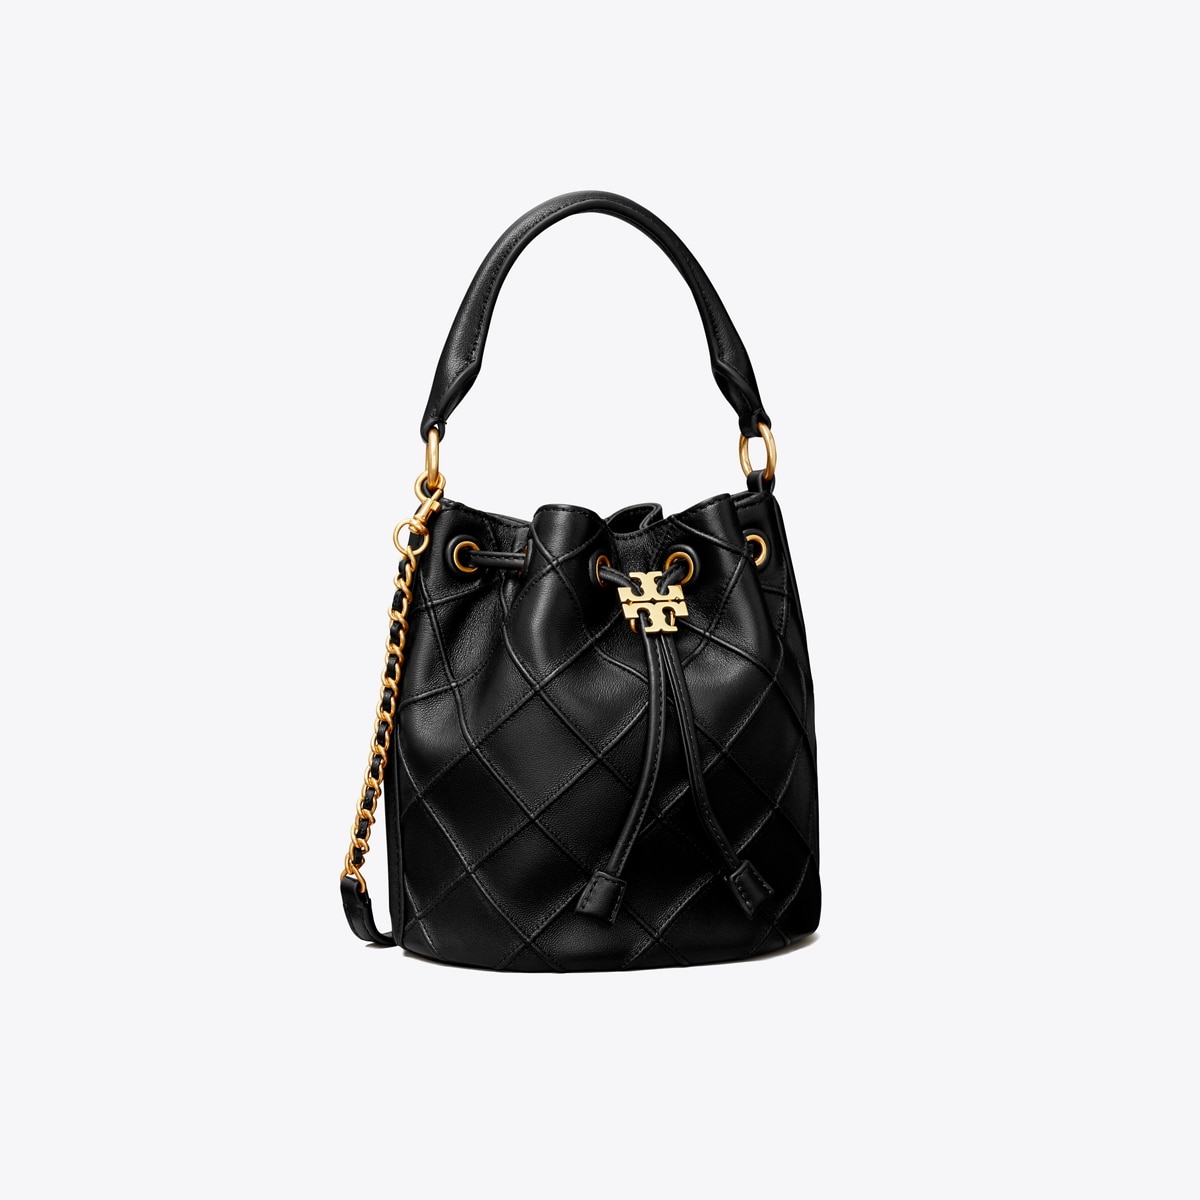 Fleming soft leather bucket bag by Tory Burch